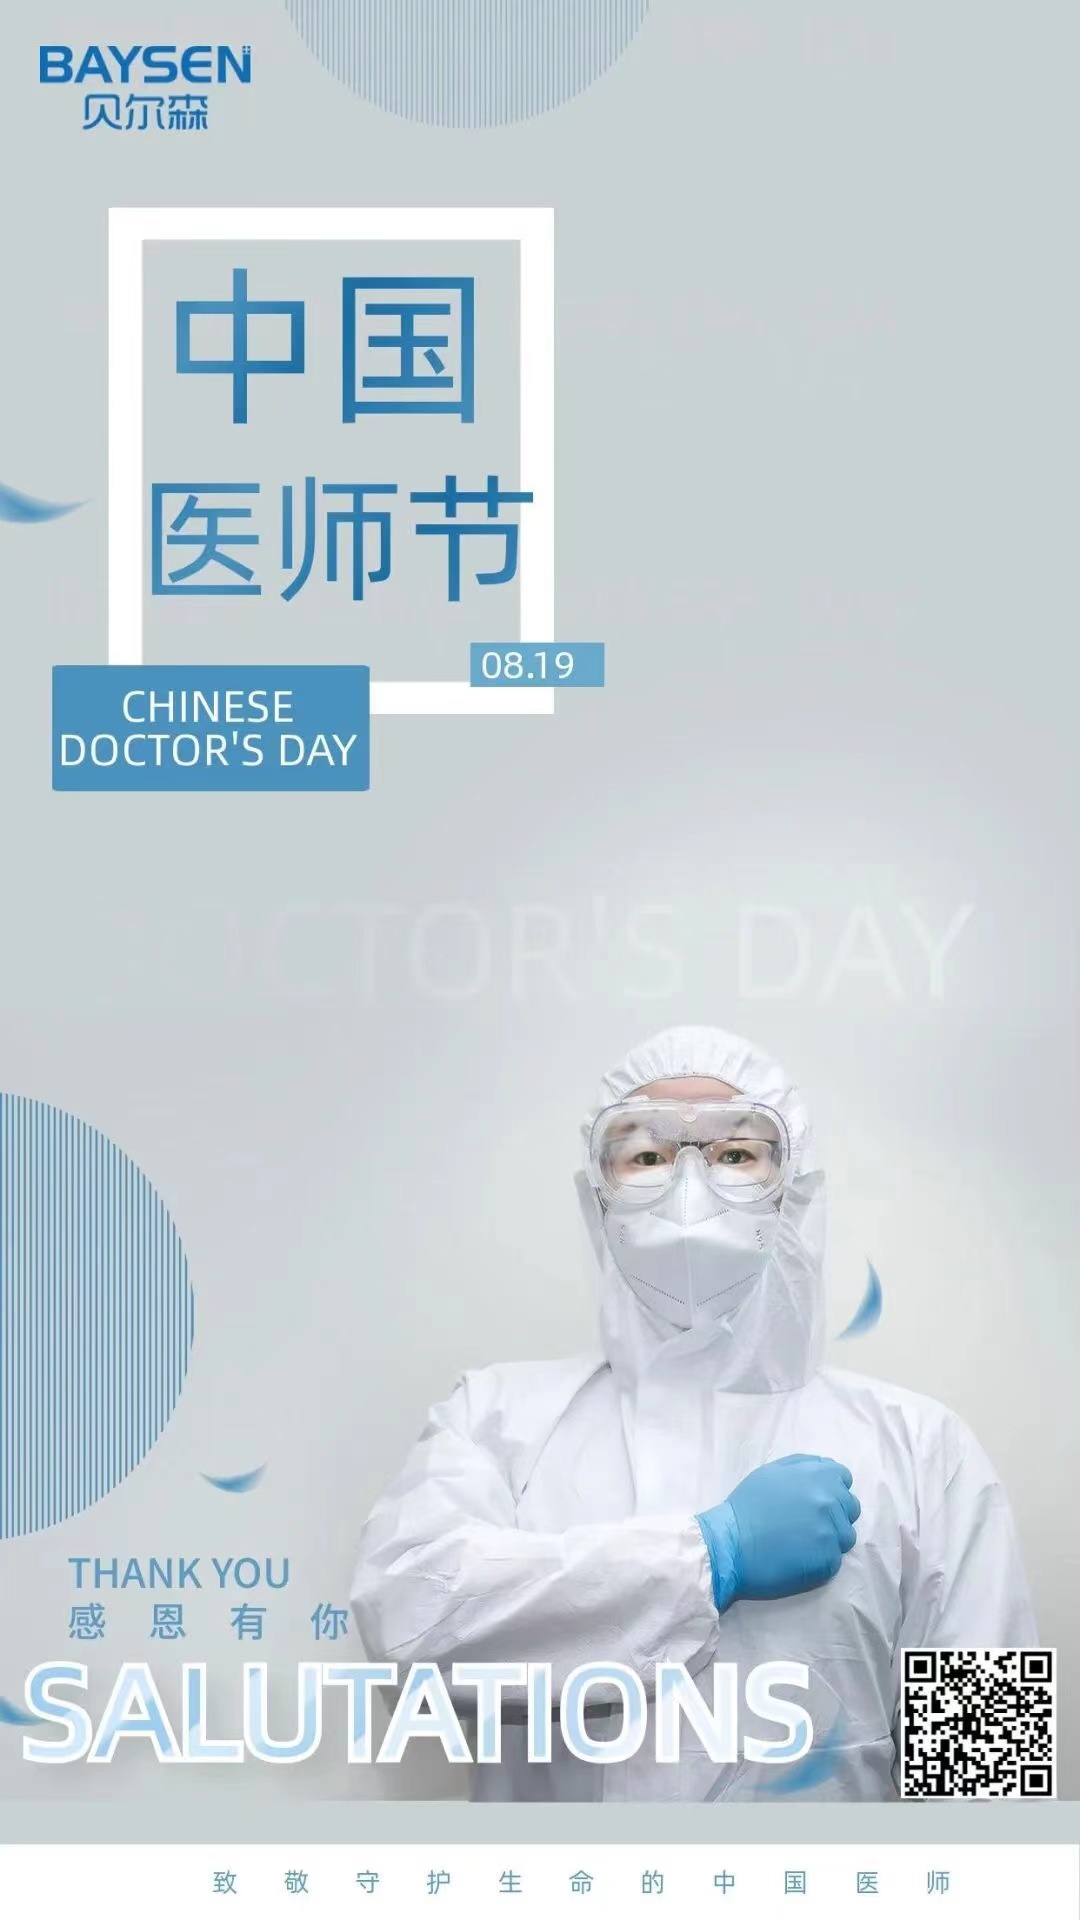 Chinese Doctors’ Day